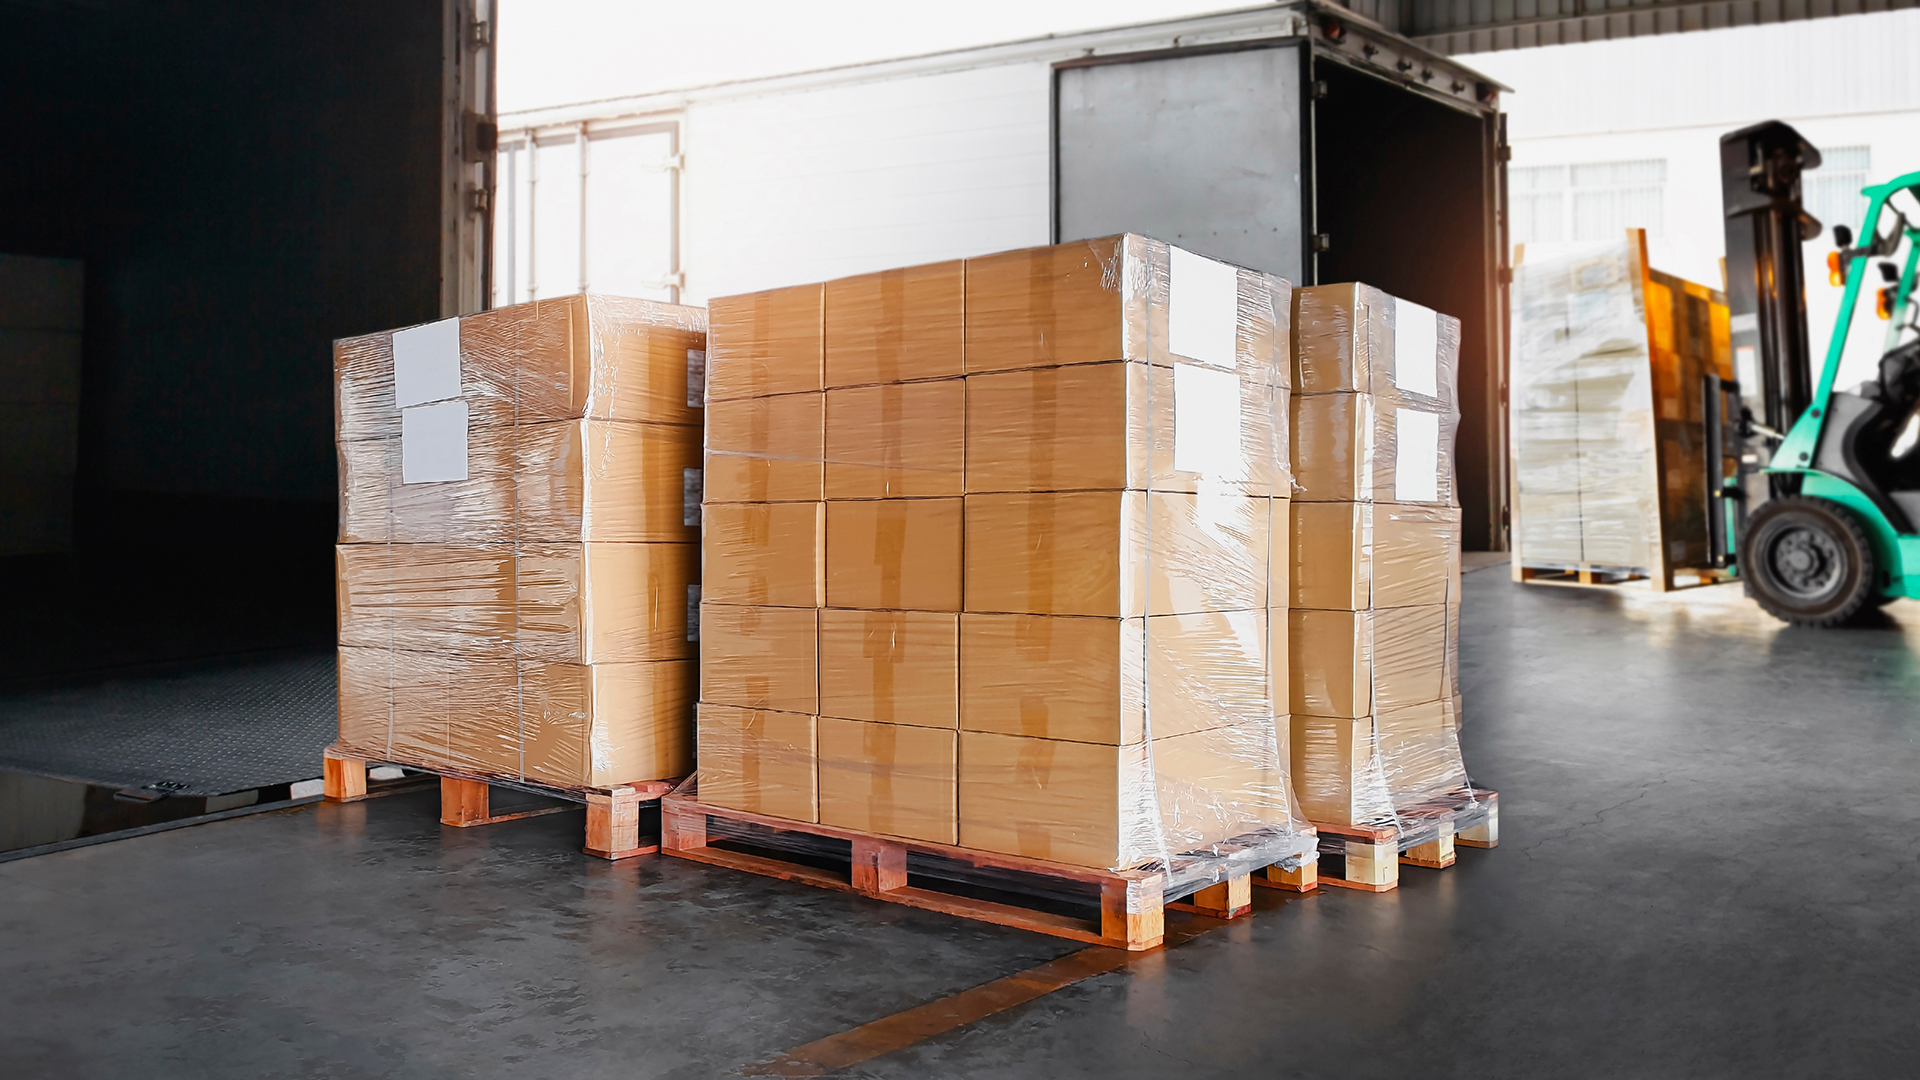 boxes stacked on pallets in a warehouse awaiting to be shipped